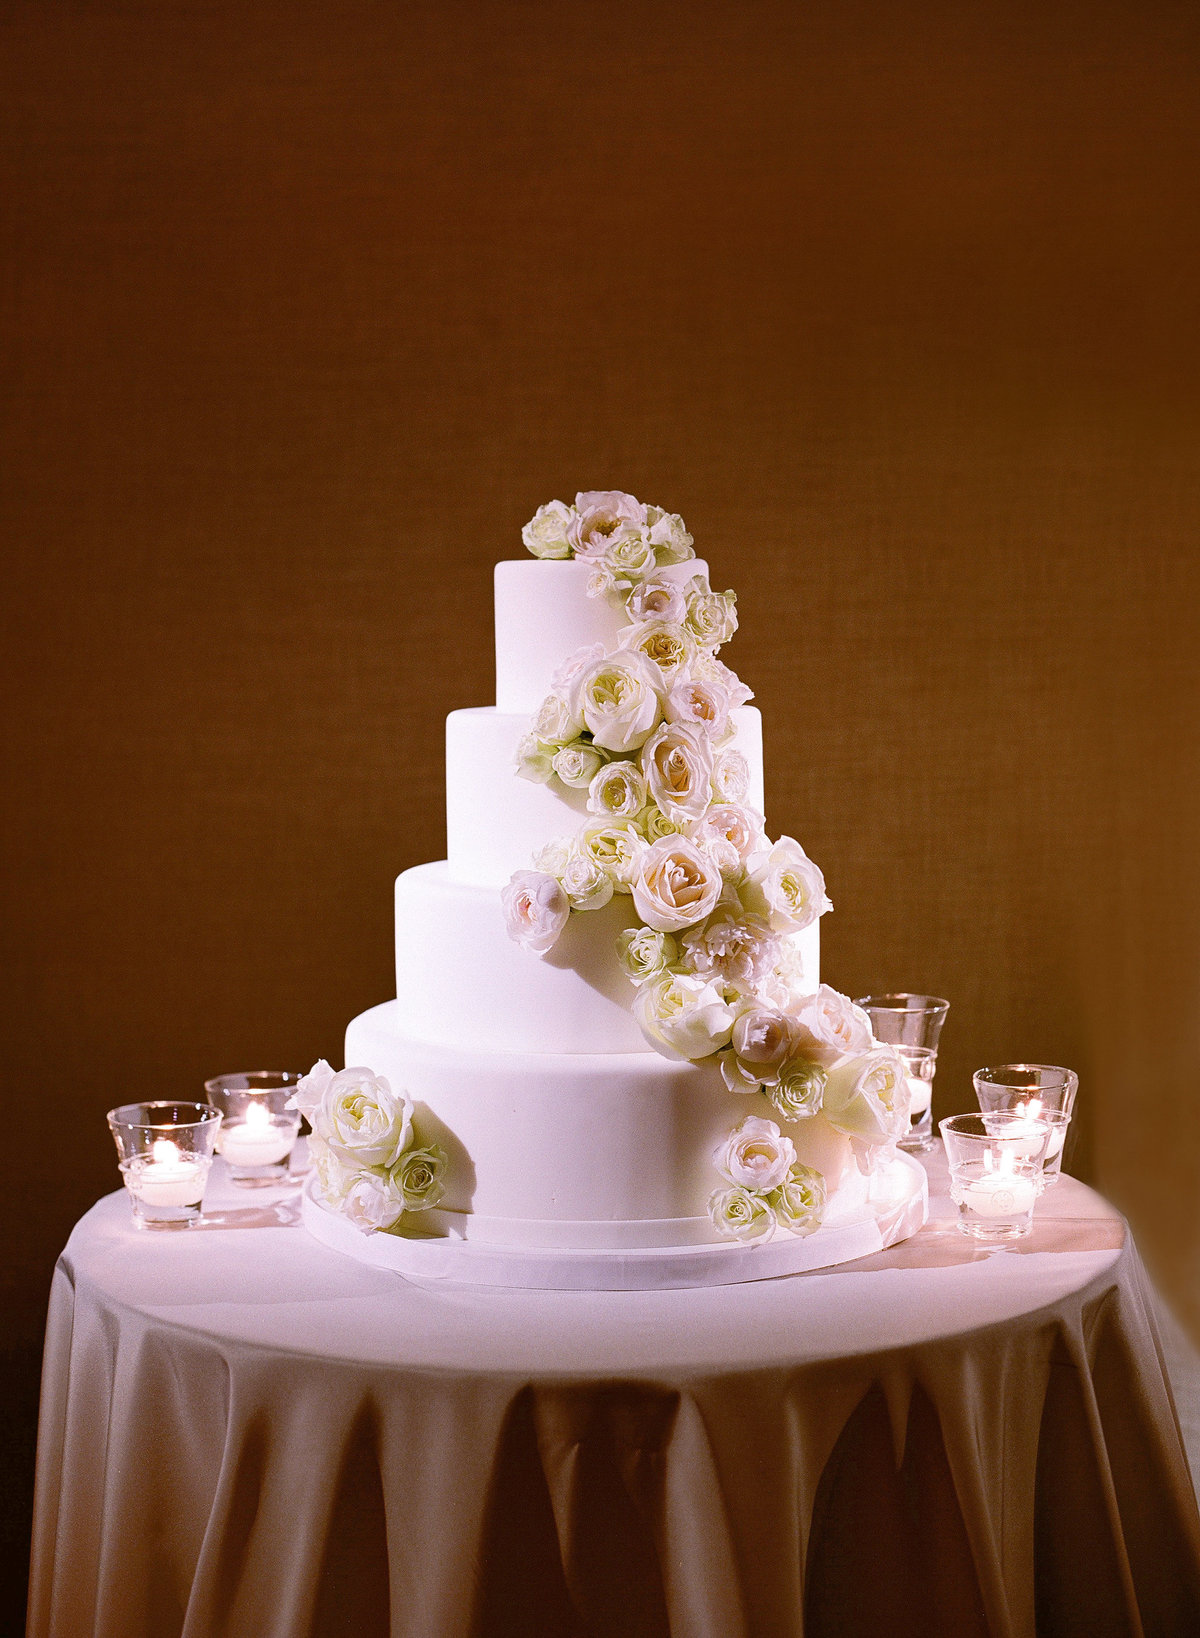 Cake for Cavallo Point wedding by Jenny Schneider Events.